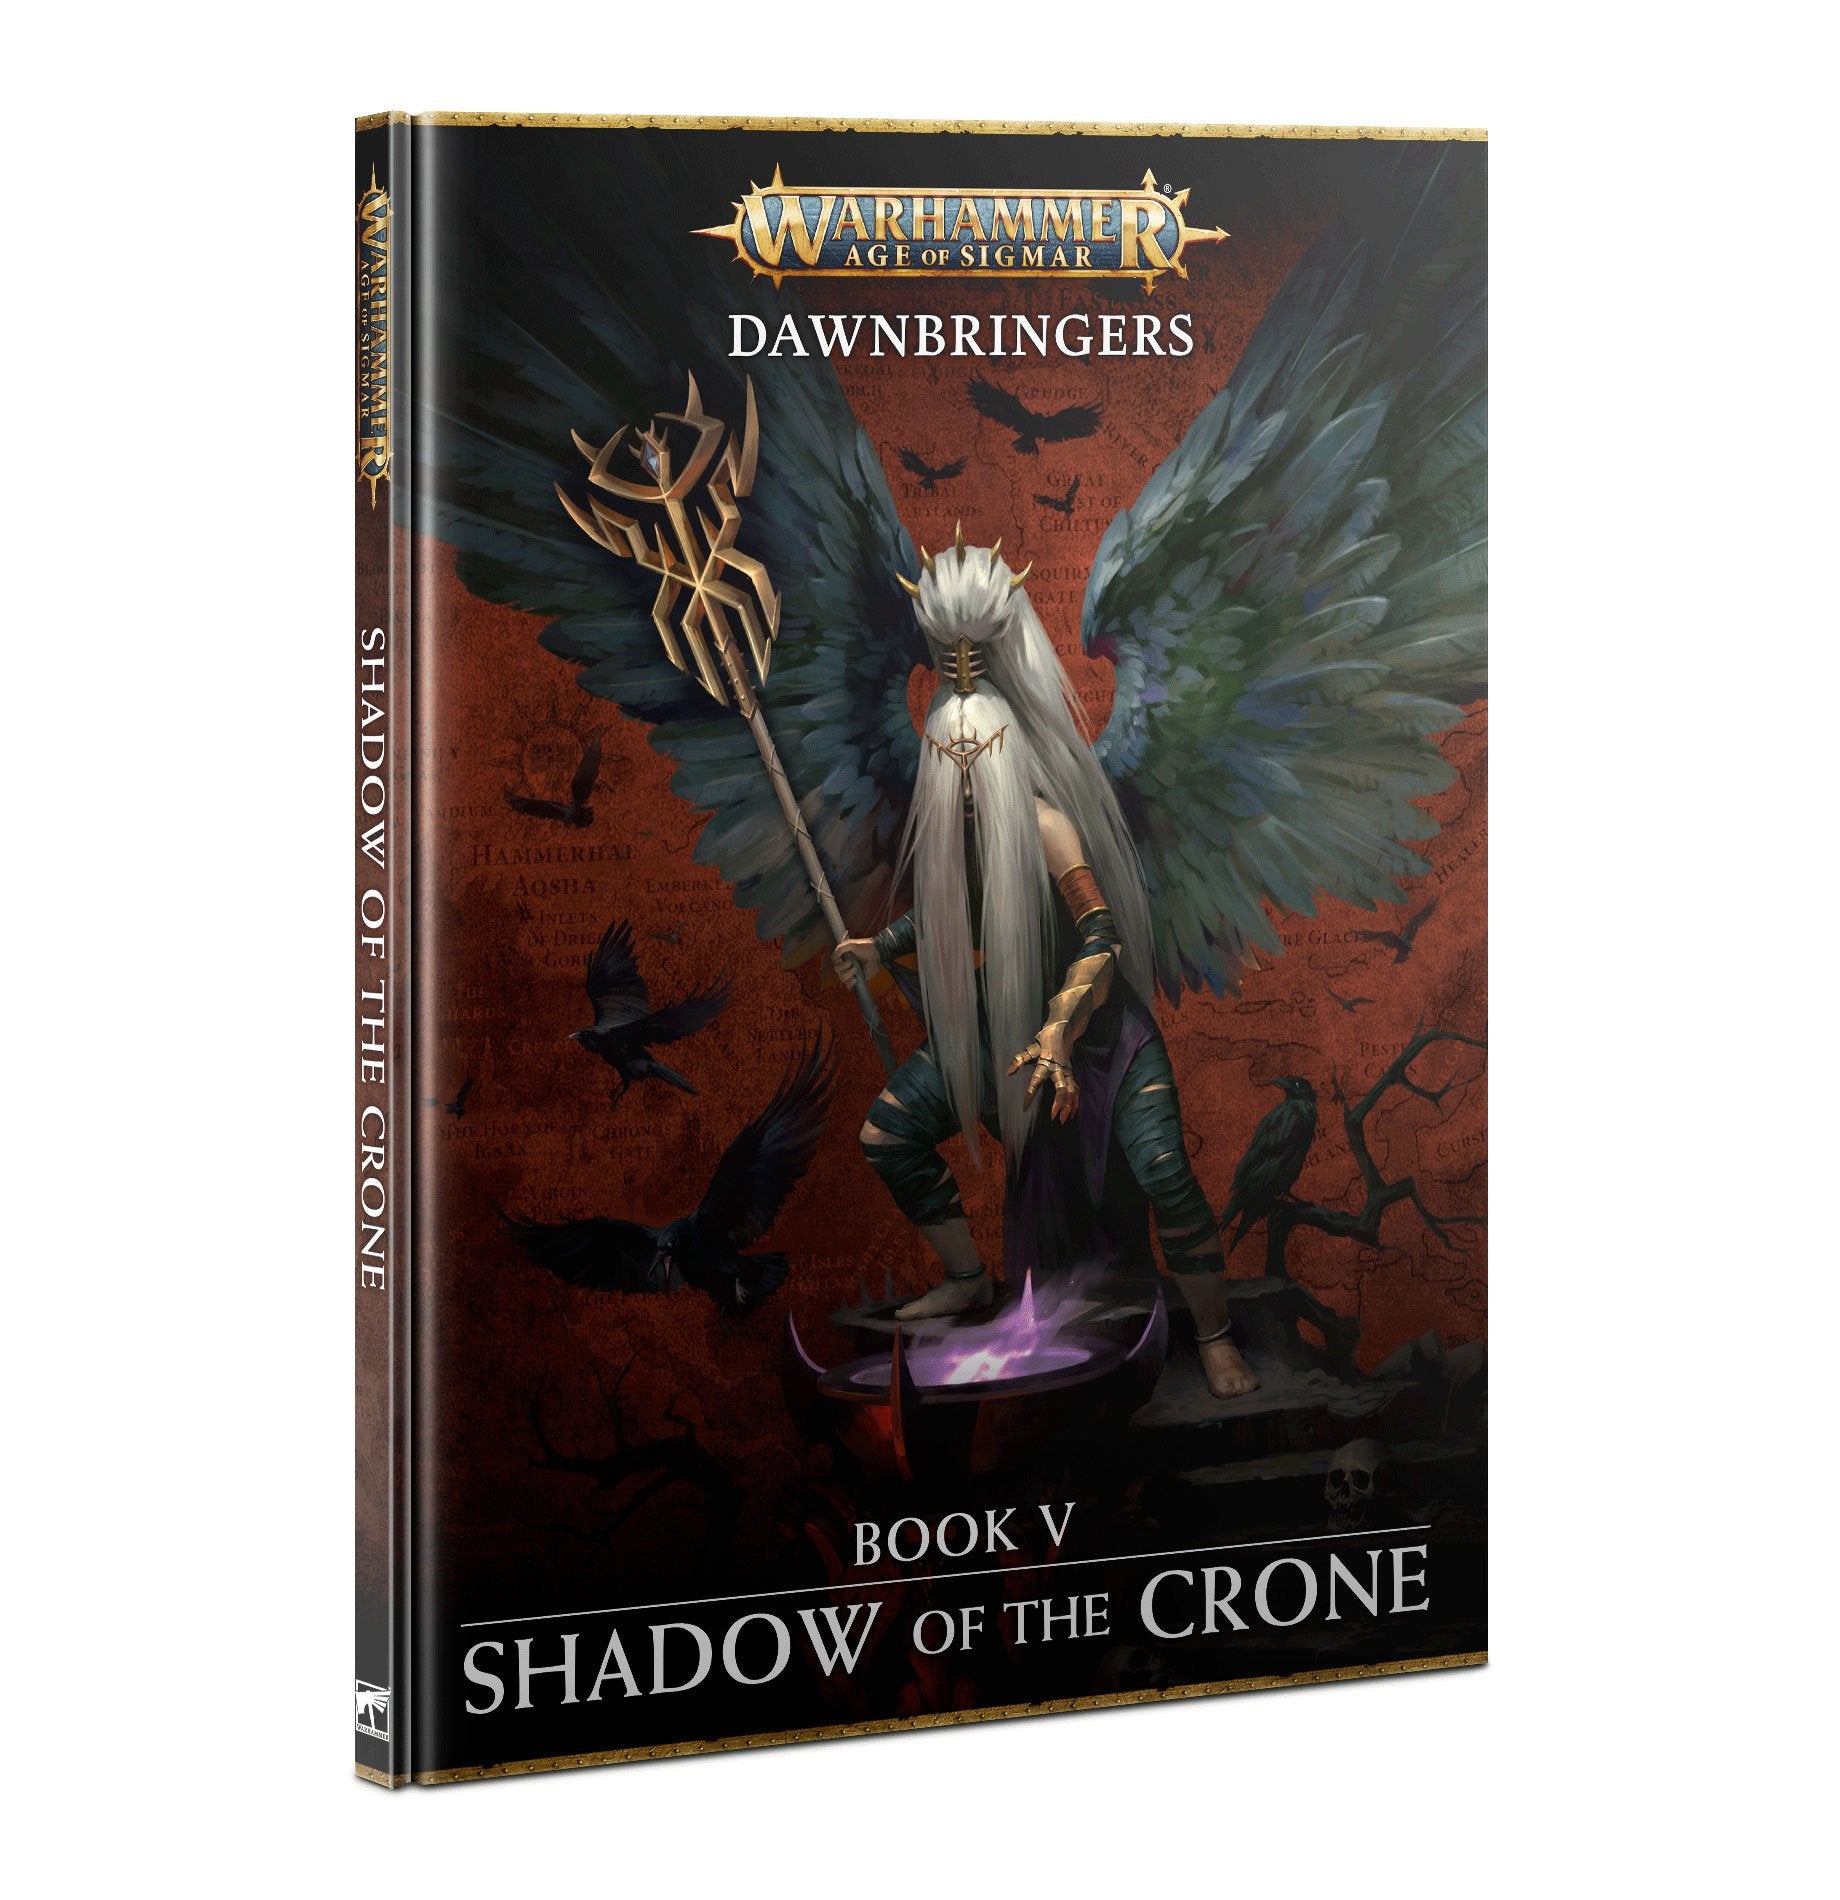 Dawnbringers: Book V - Shadow of the Crone Seer | The Clever Kobold